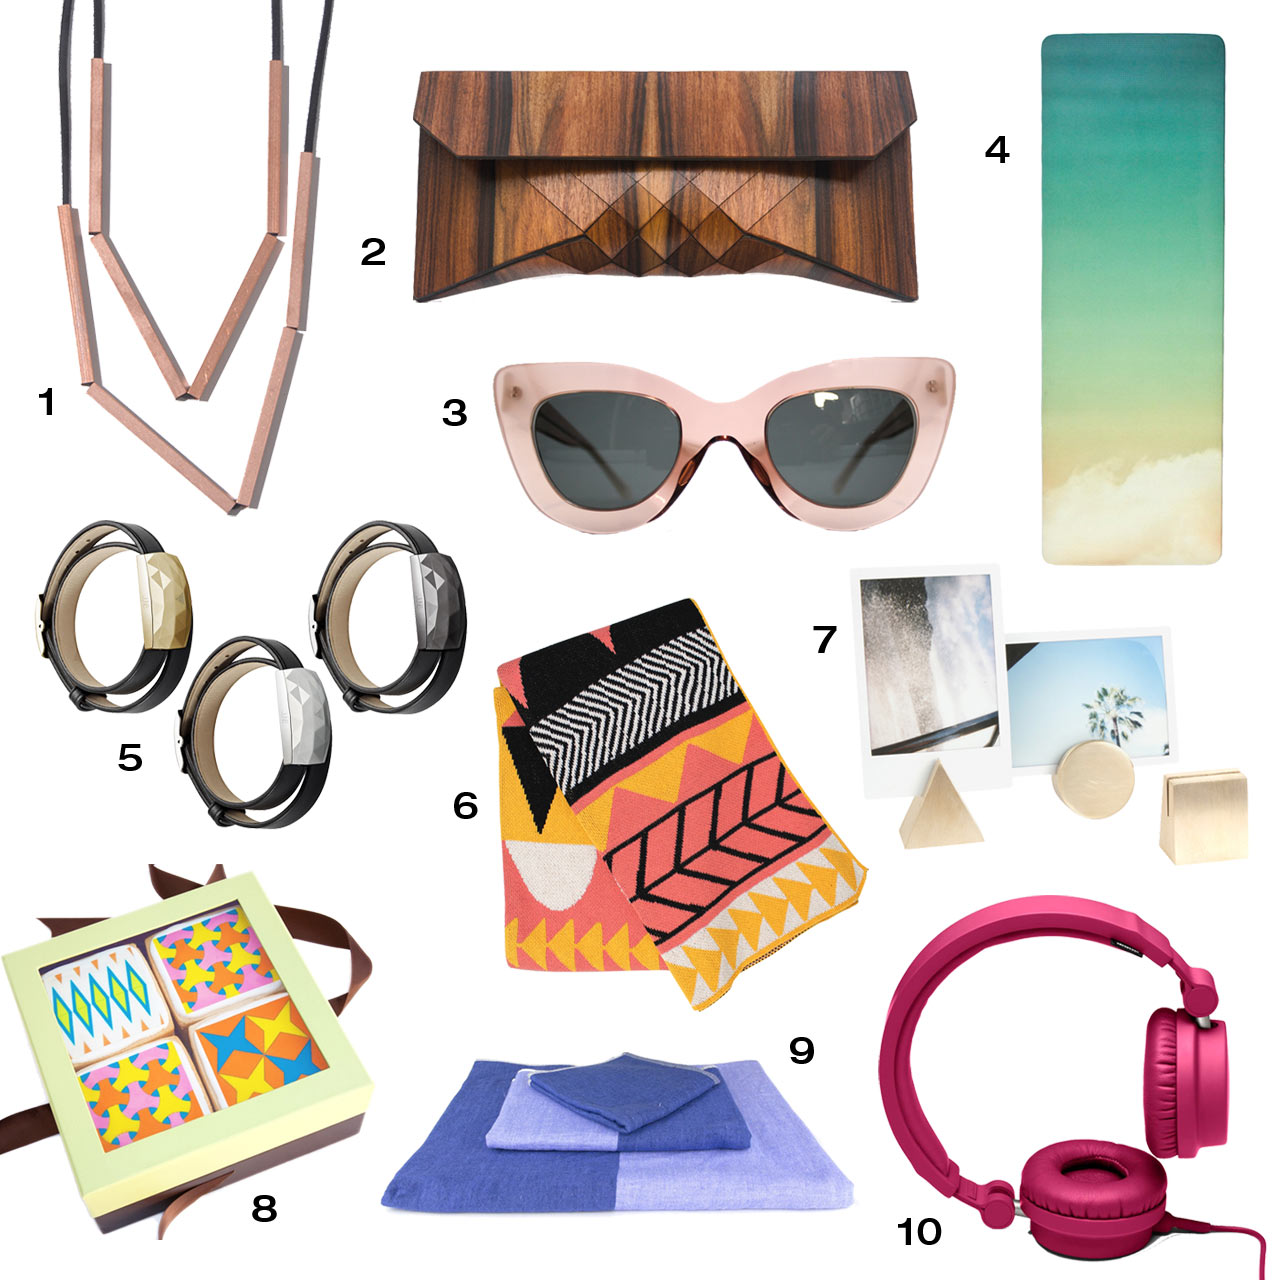 Roundup: 10 Modern Gifts for Mother’s Day